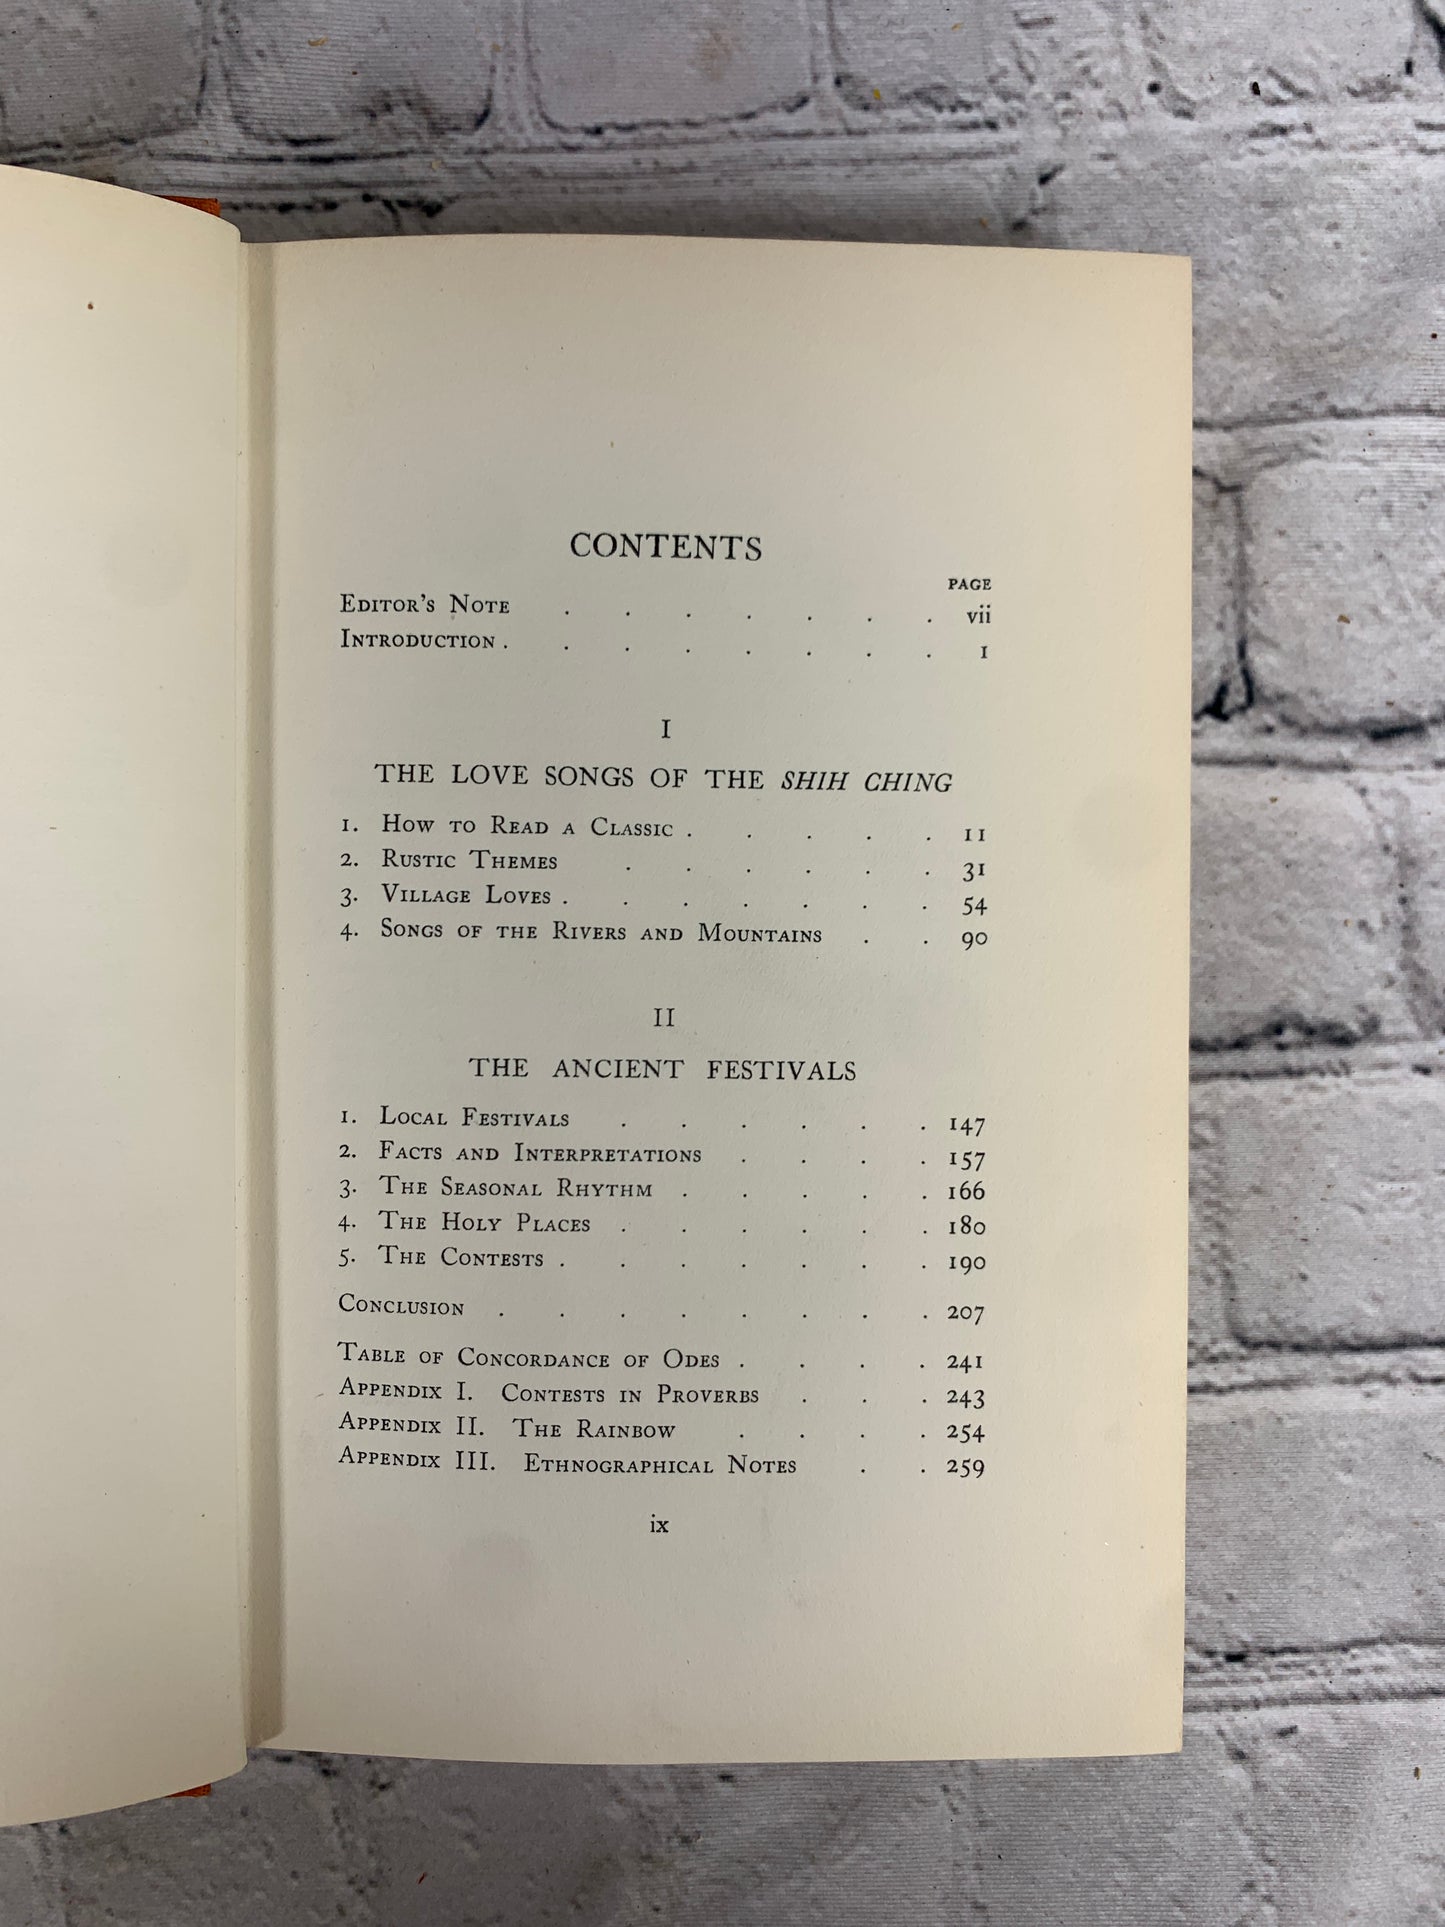 Festivals and Songs of Ancient China by Marcel Granet [1932]